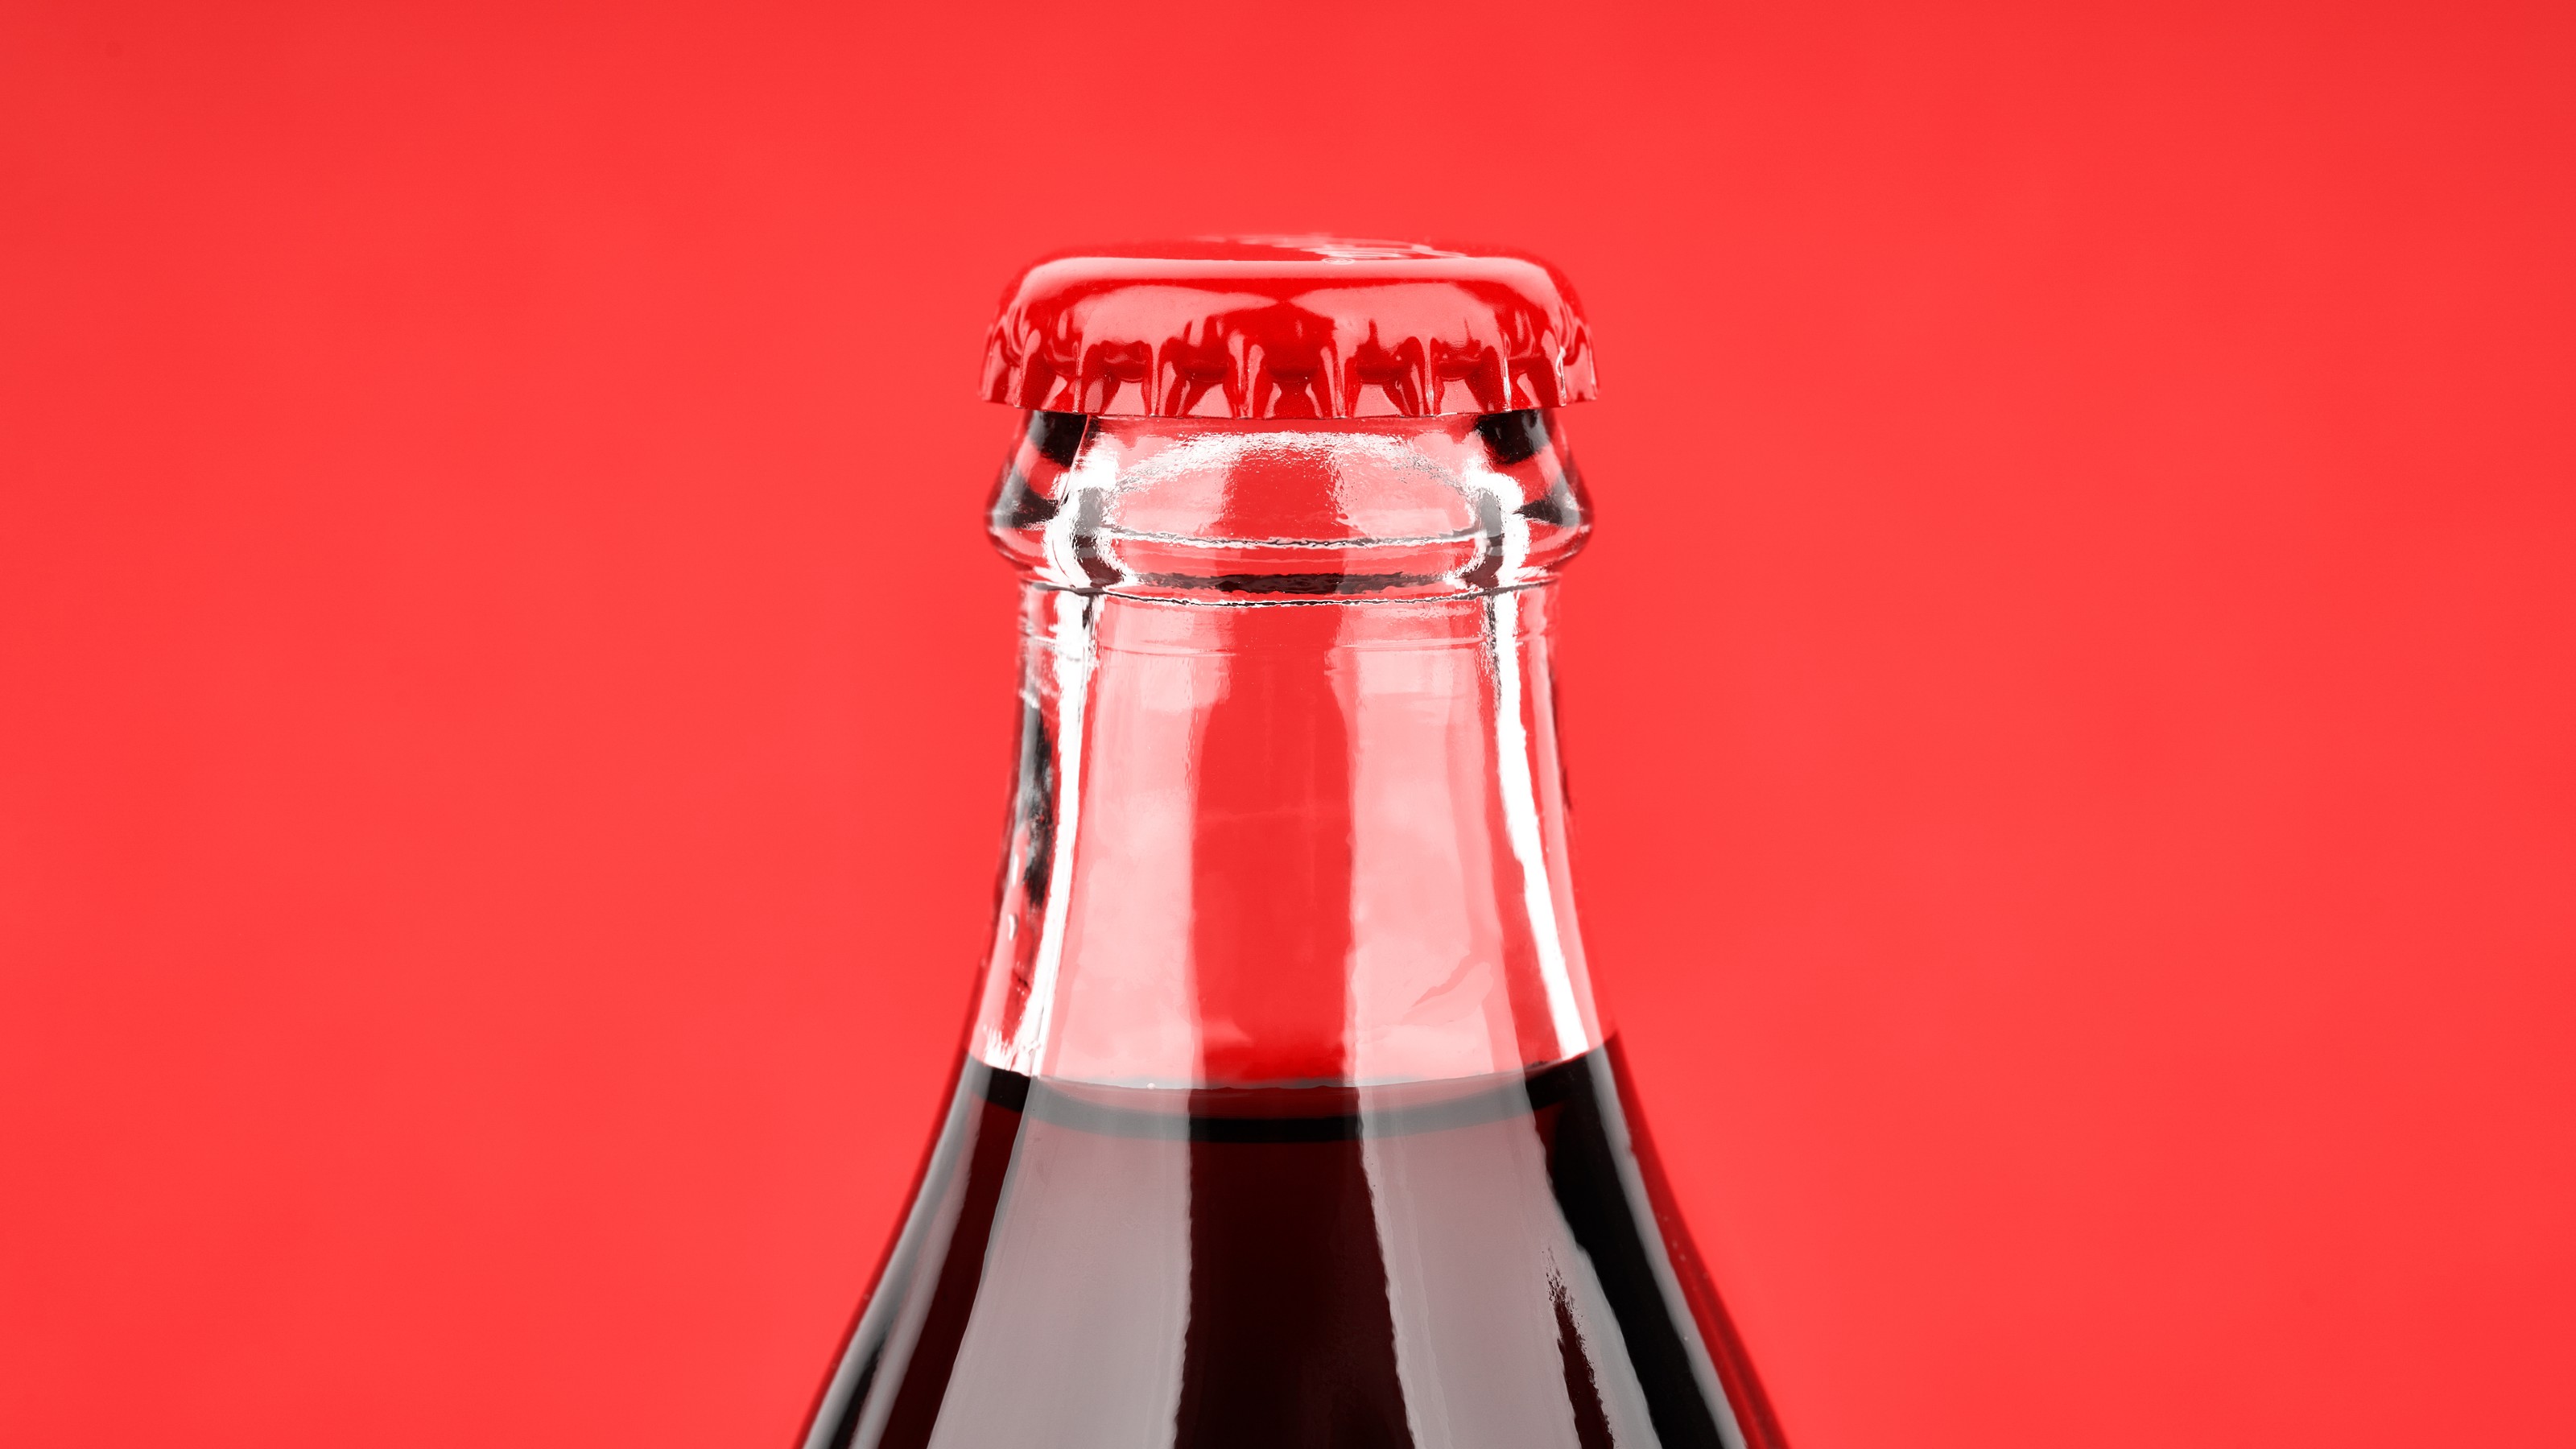 A bottle of Coca Cola on a red background.